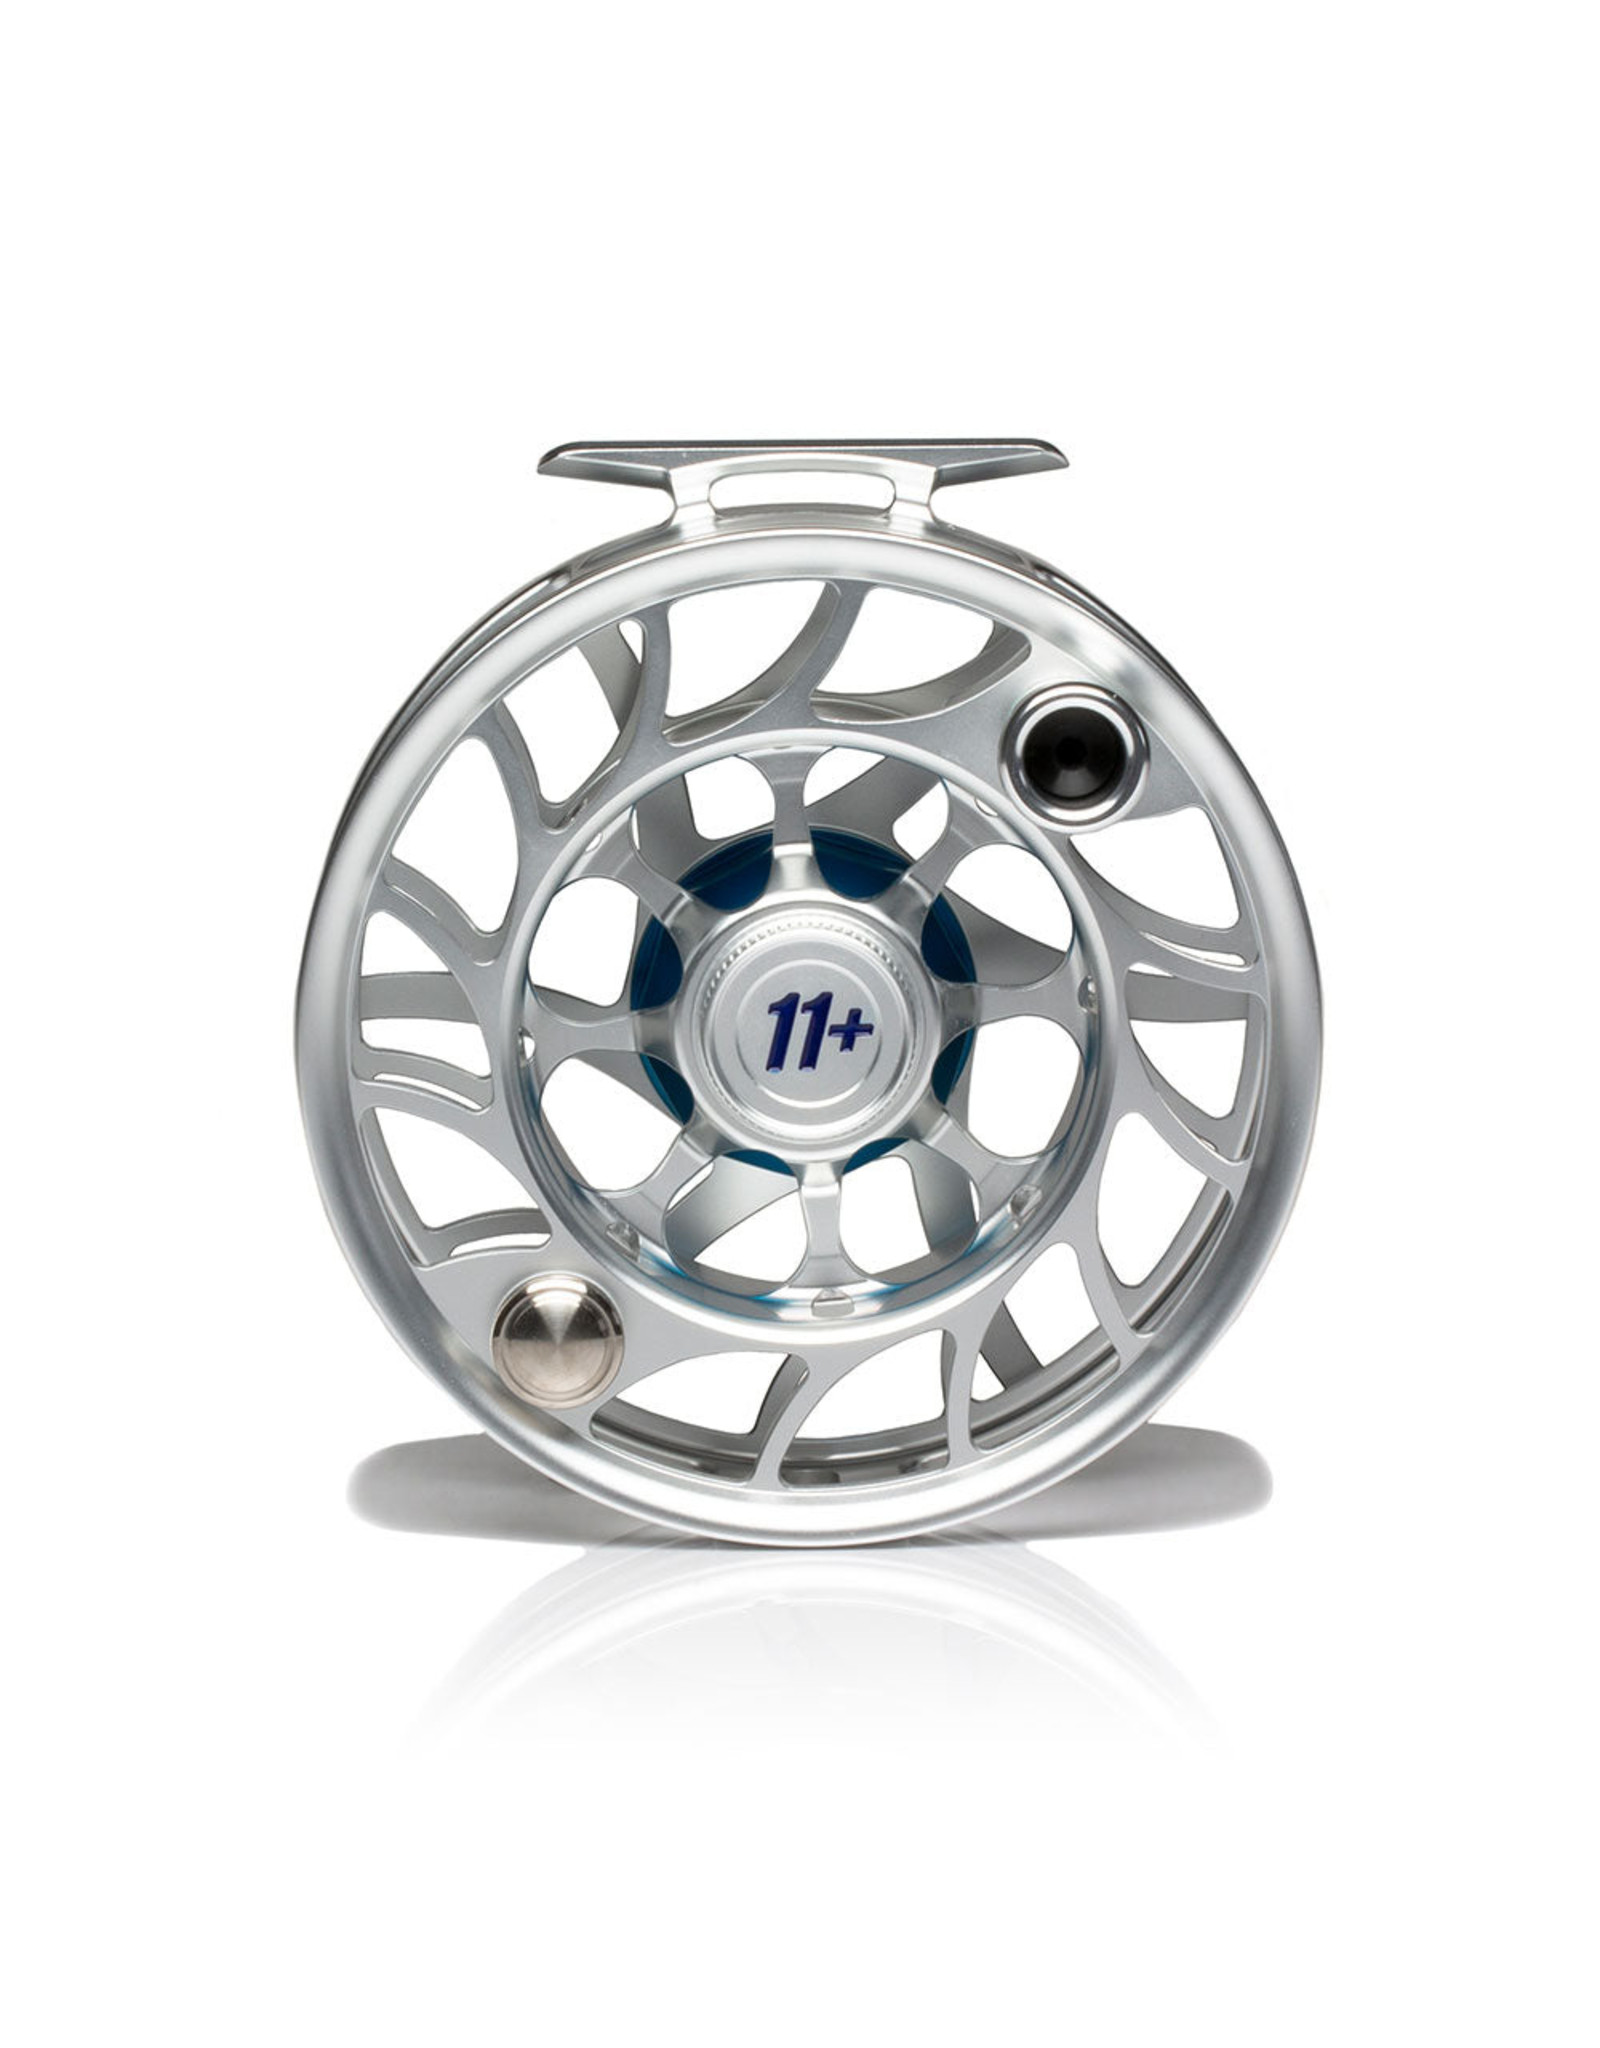 Hatch Hatch Iconic Reel Clear/Blue 11+ Large Arbor